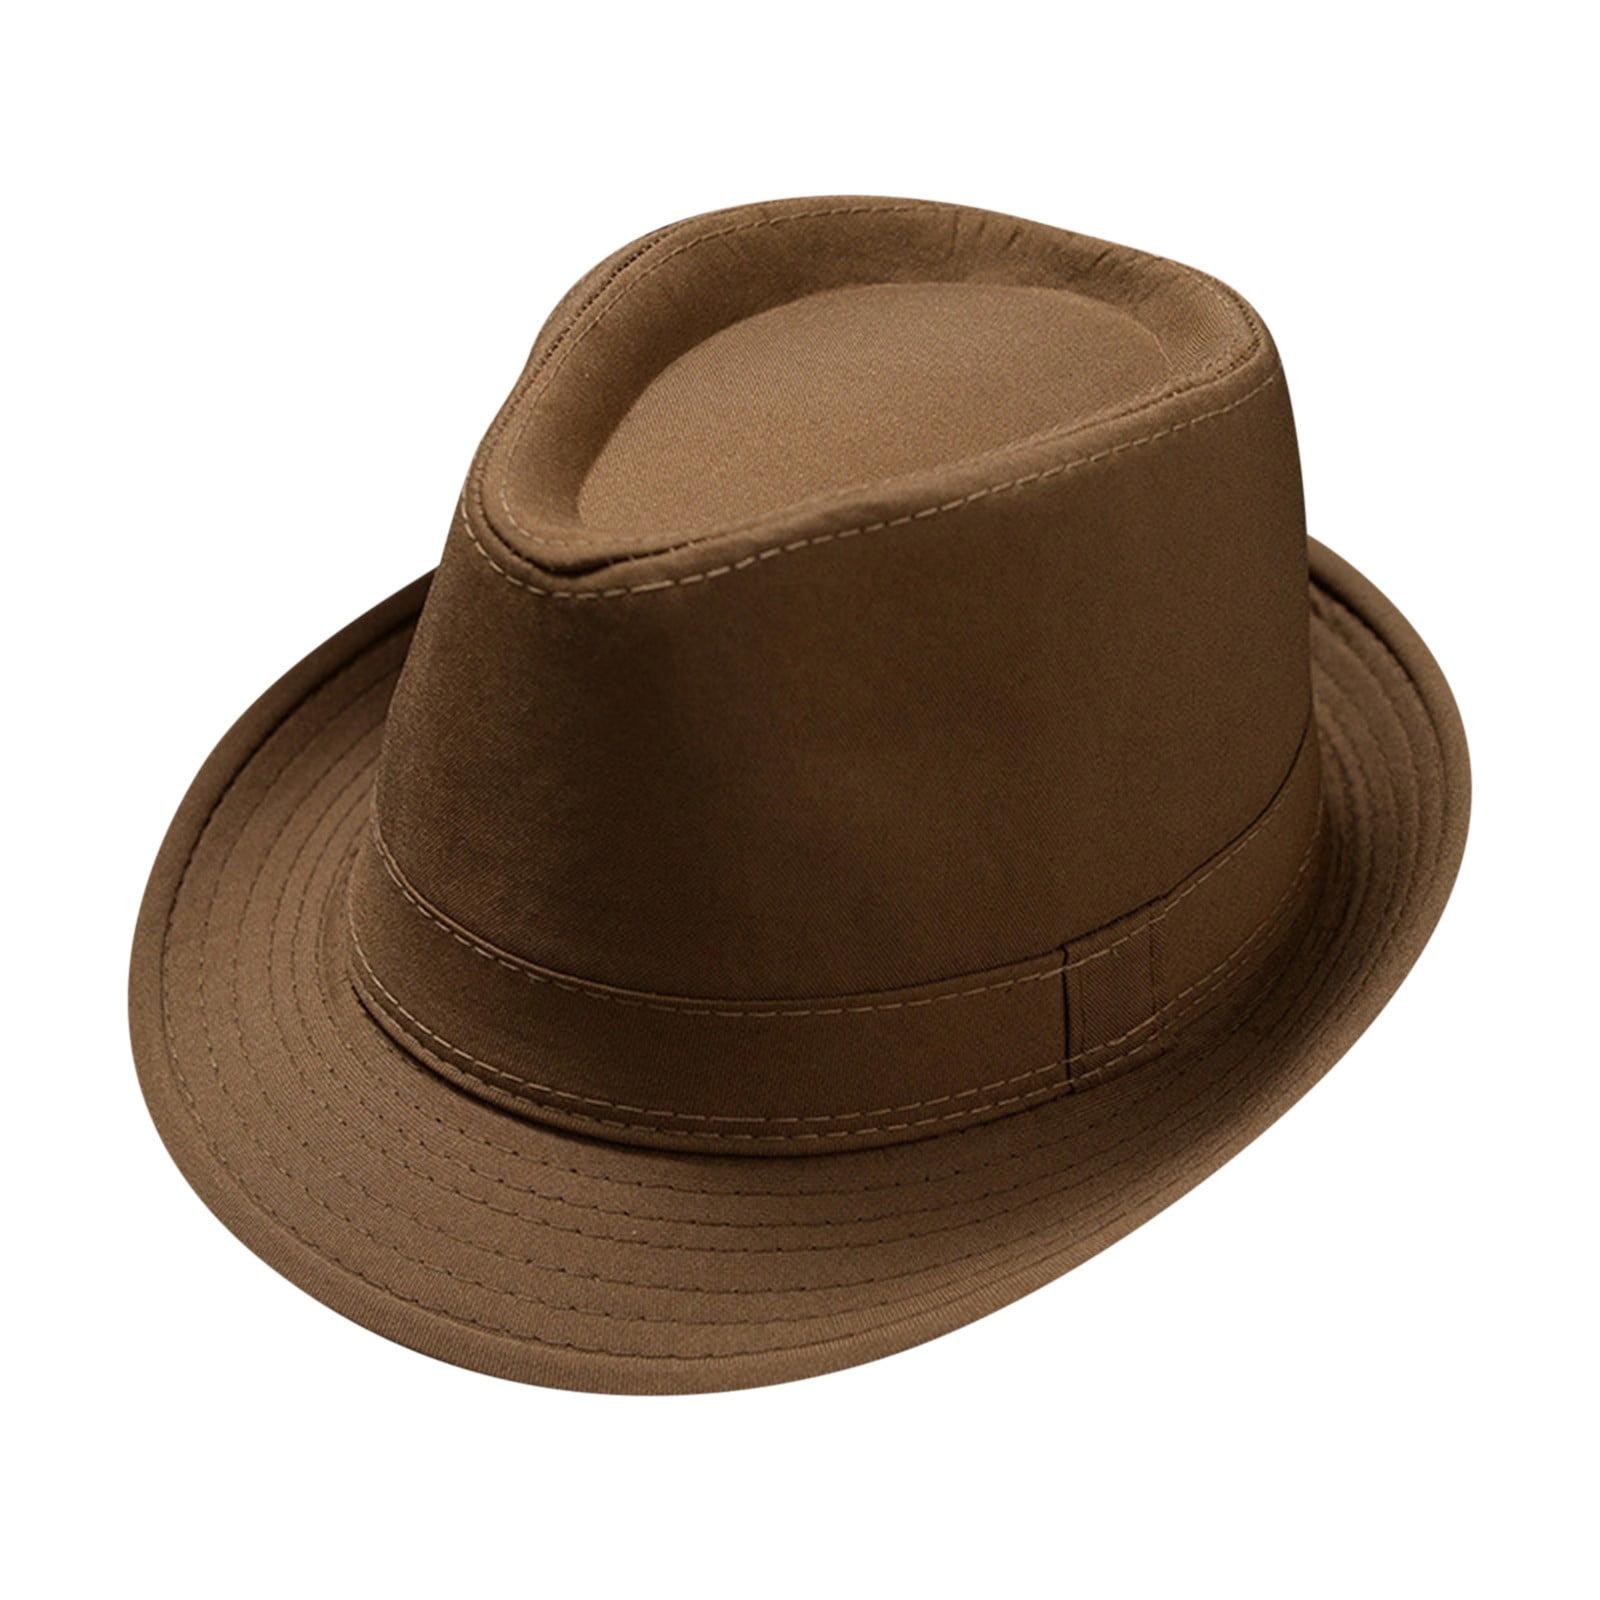 HSMQHJWE Newsboy Hats For Women Large Head Hats For Men Men And